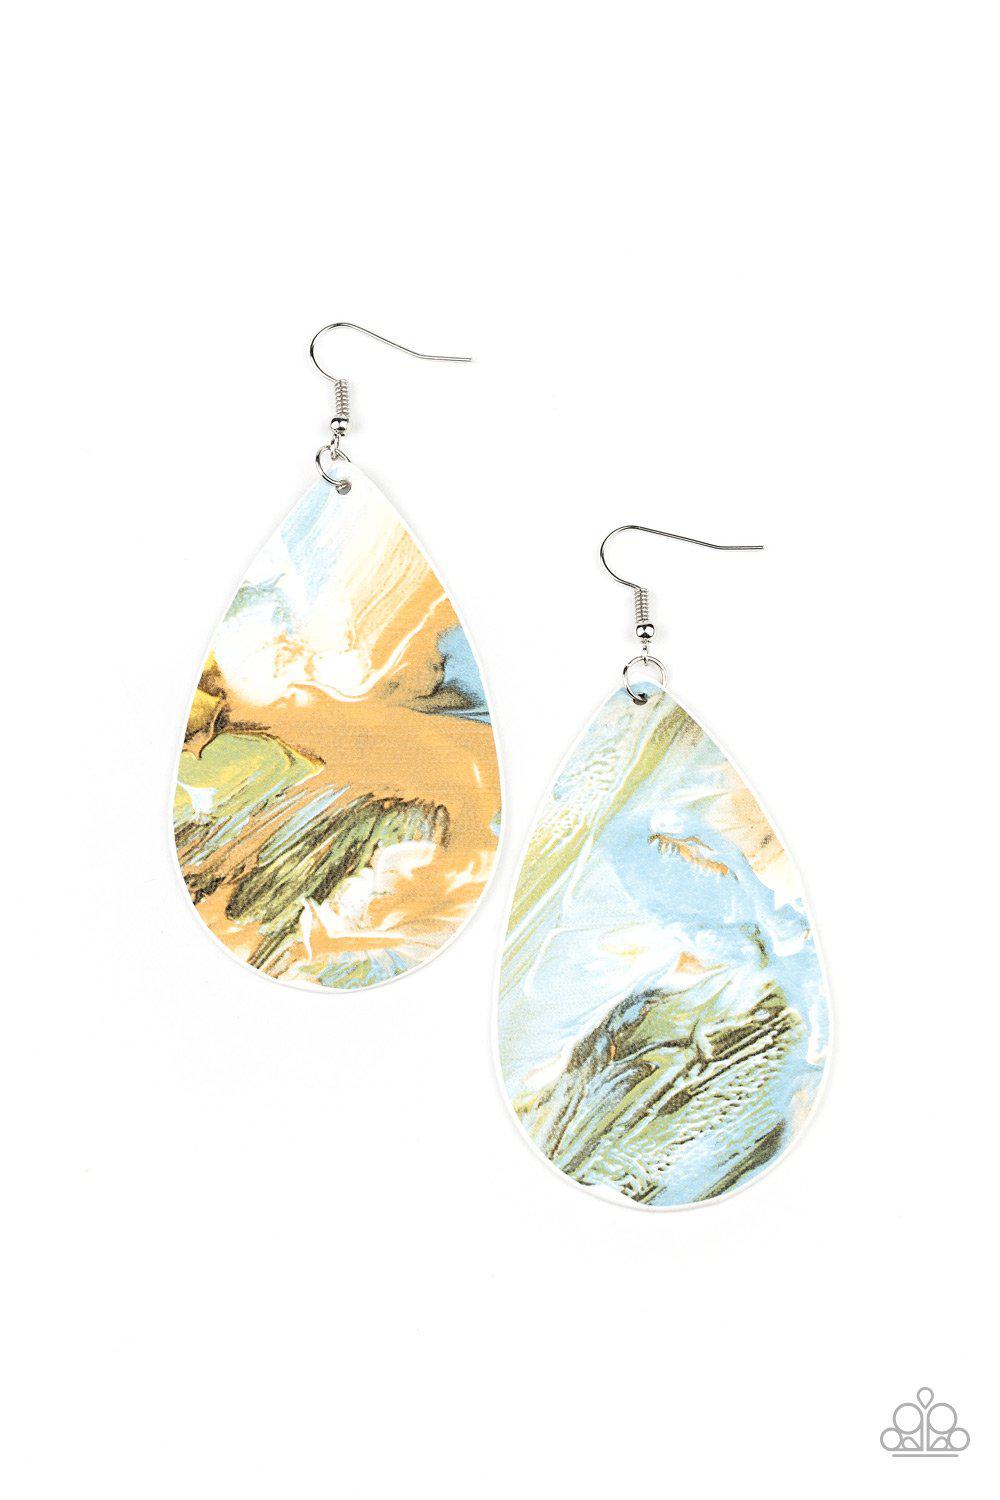 Mesmerizing Mosaic Multi Blue, Brown, Green and White Leather Teardrop Earrings - Paparazzi Accessories-CarasShop.com - $5 Jewelry by Cara Jewels